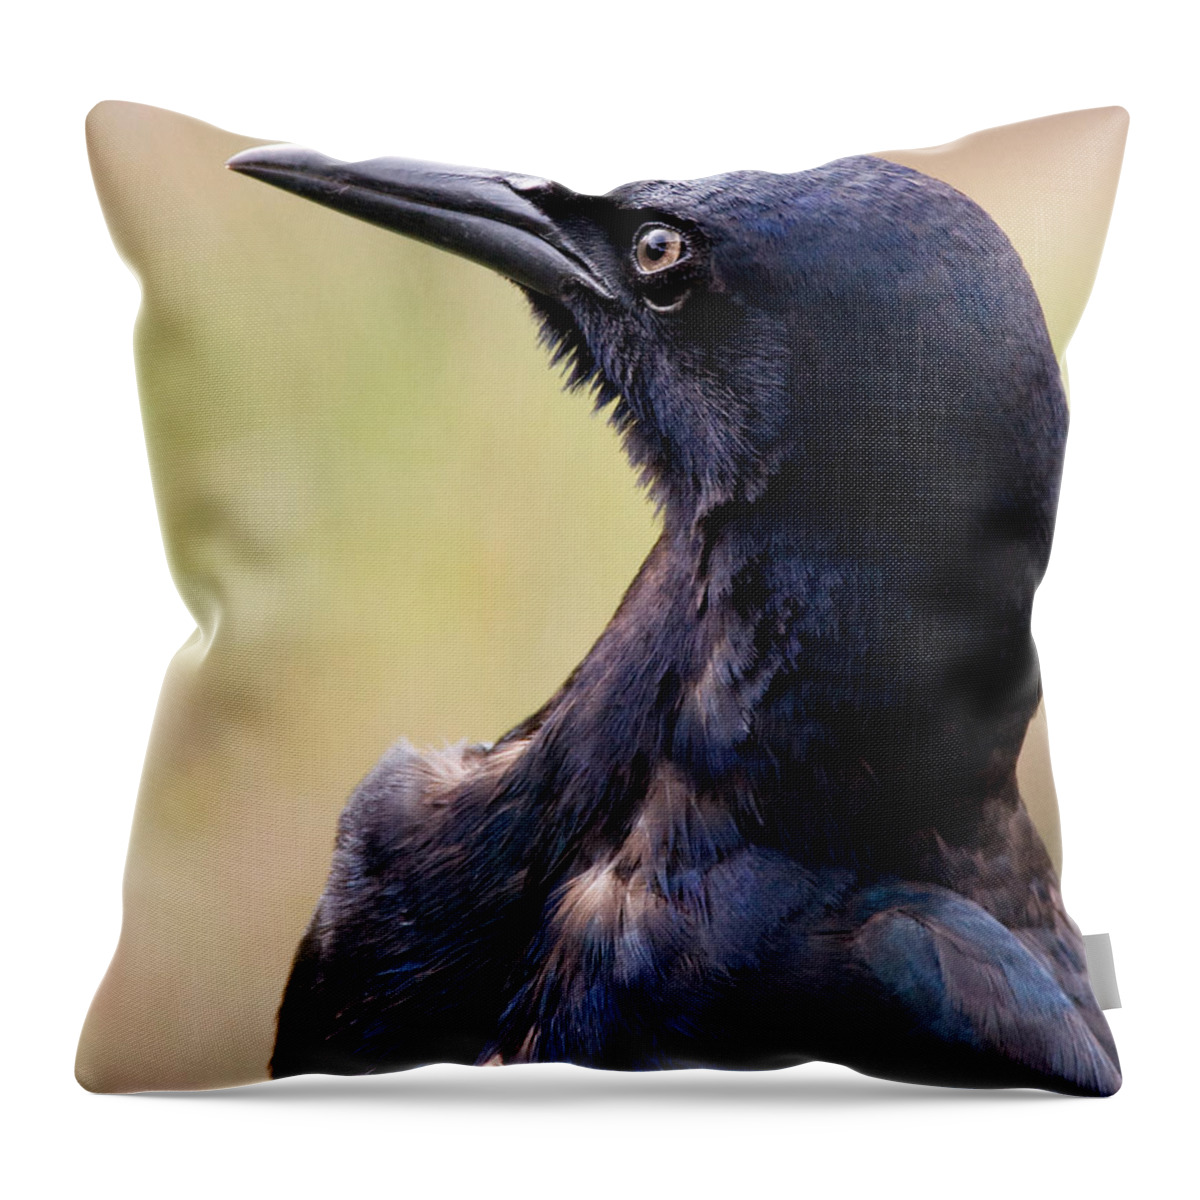 Bird Throw Pillow featuring the photograph On Alert by Christopher Holmes